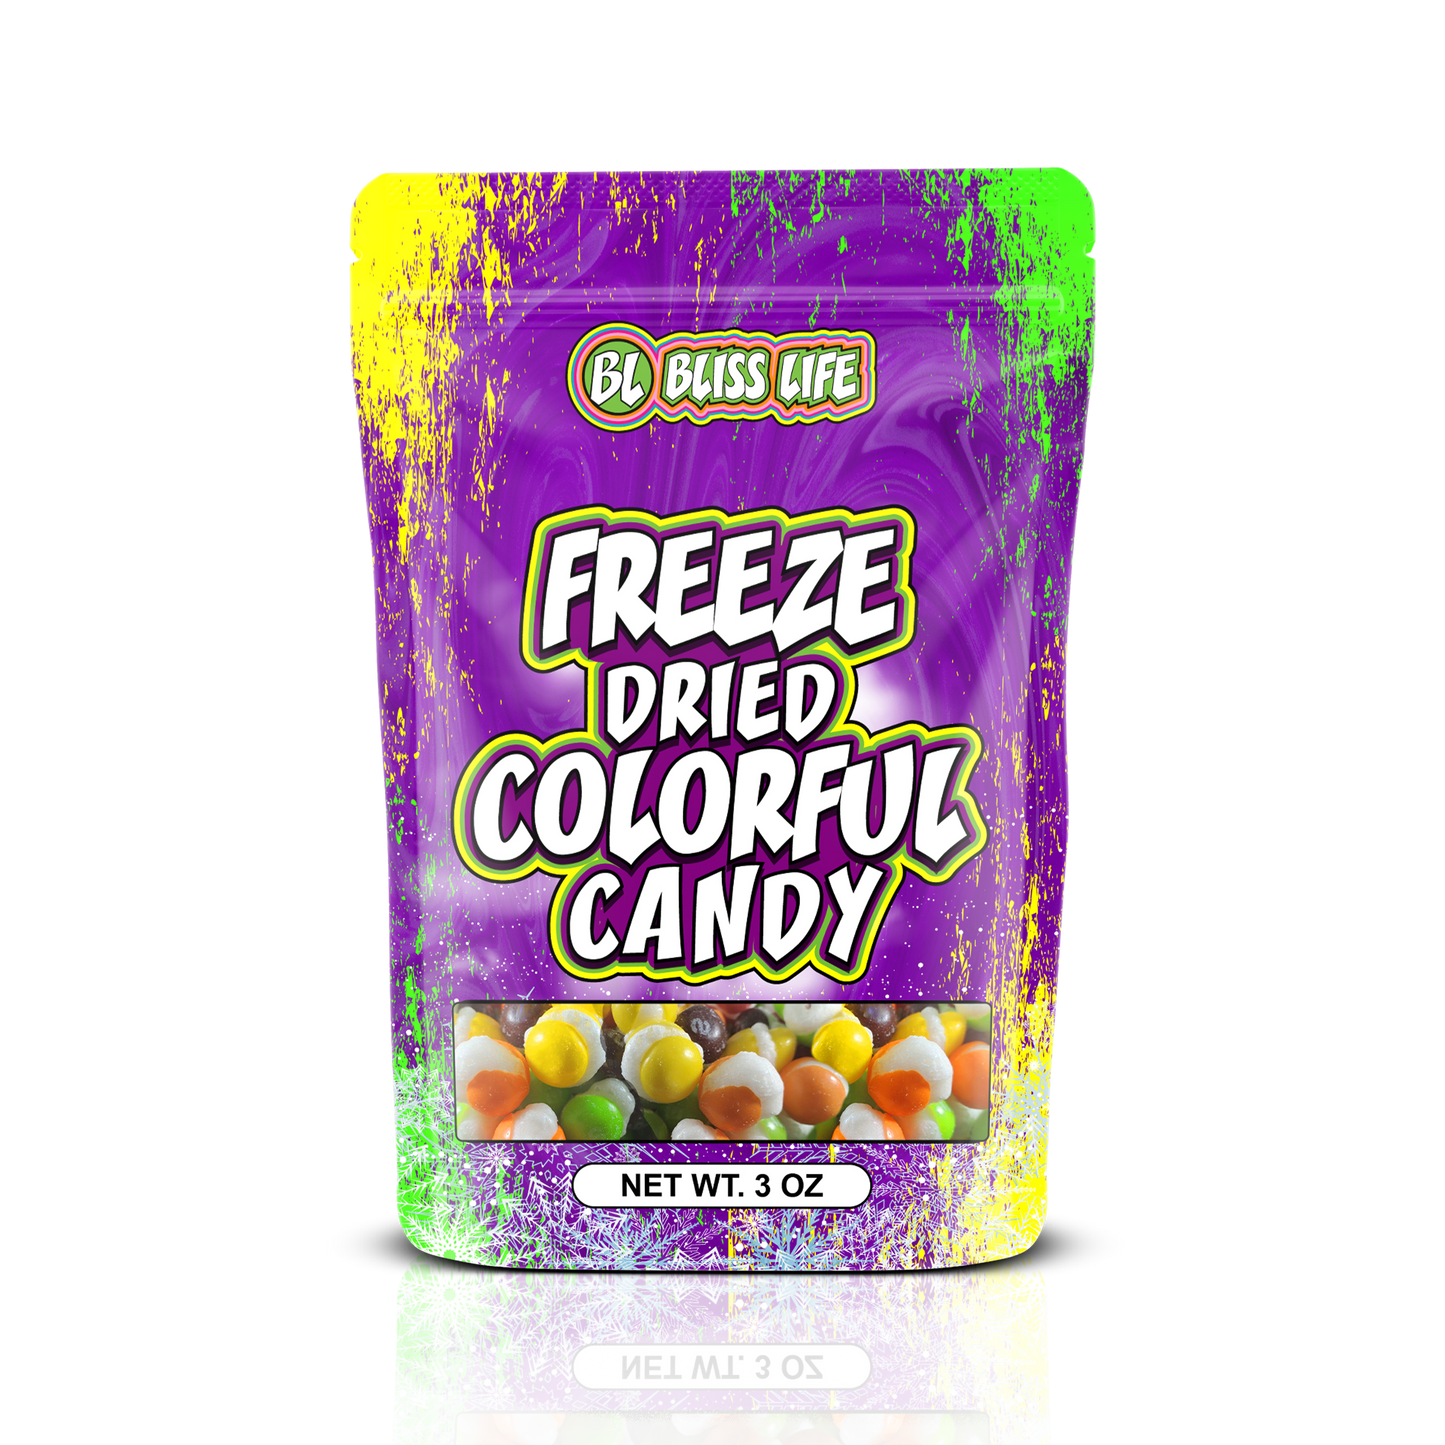 Freeze Dried Original Colorful Candy